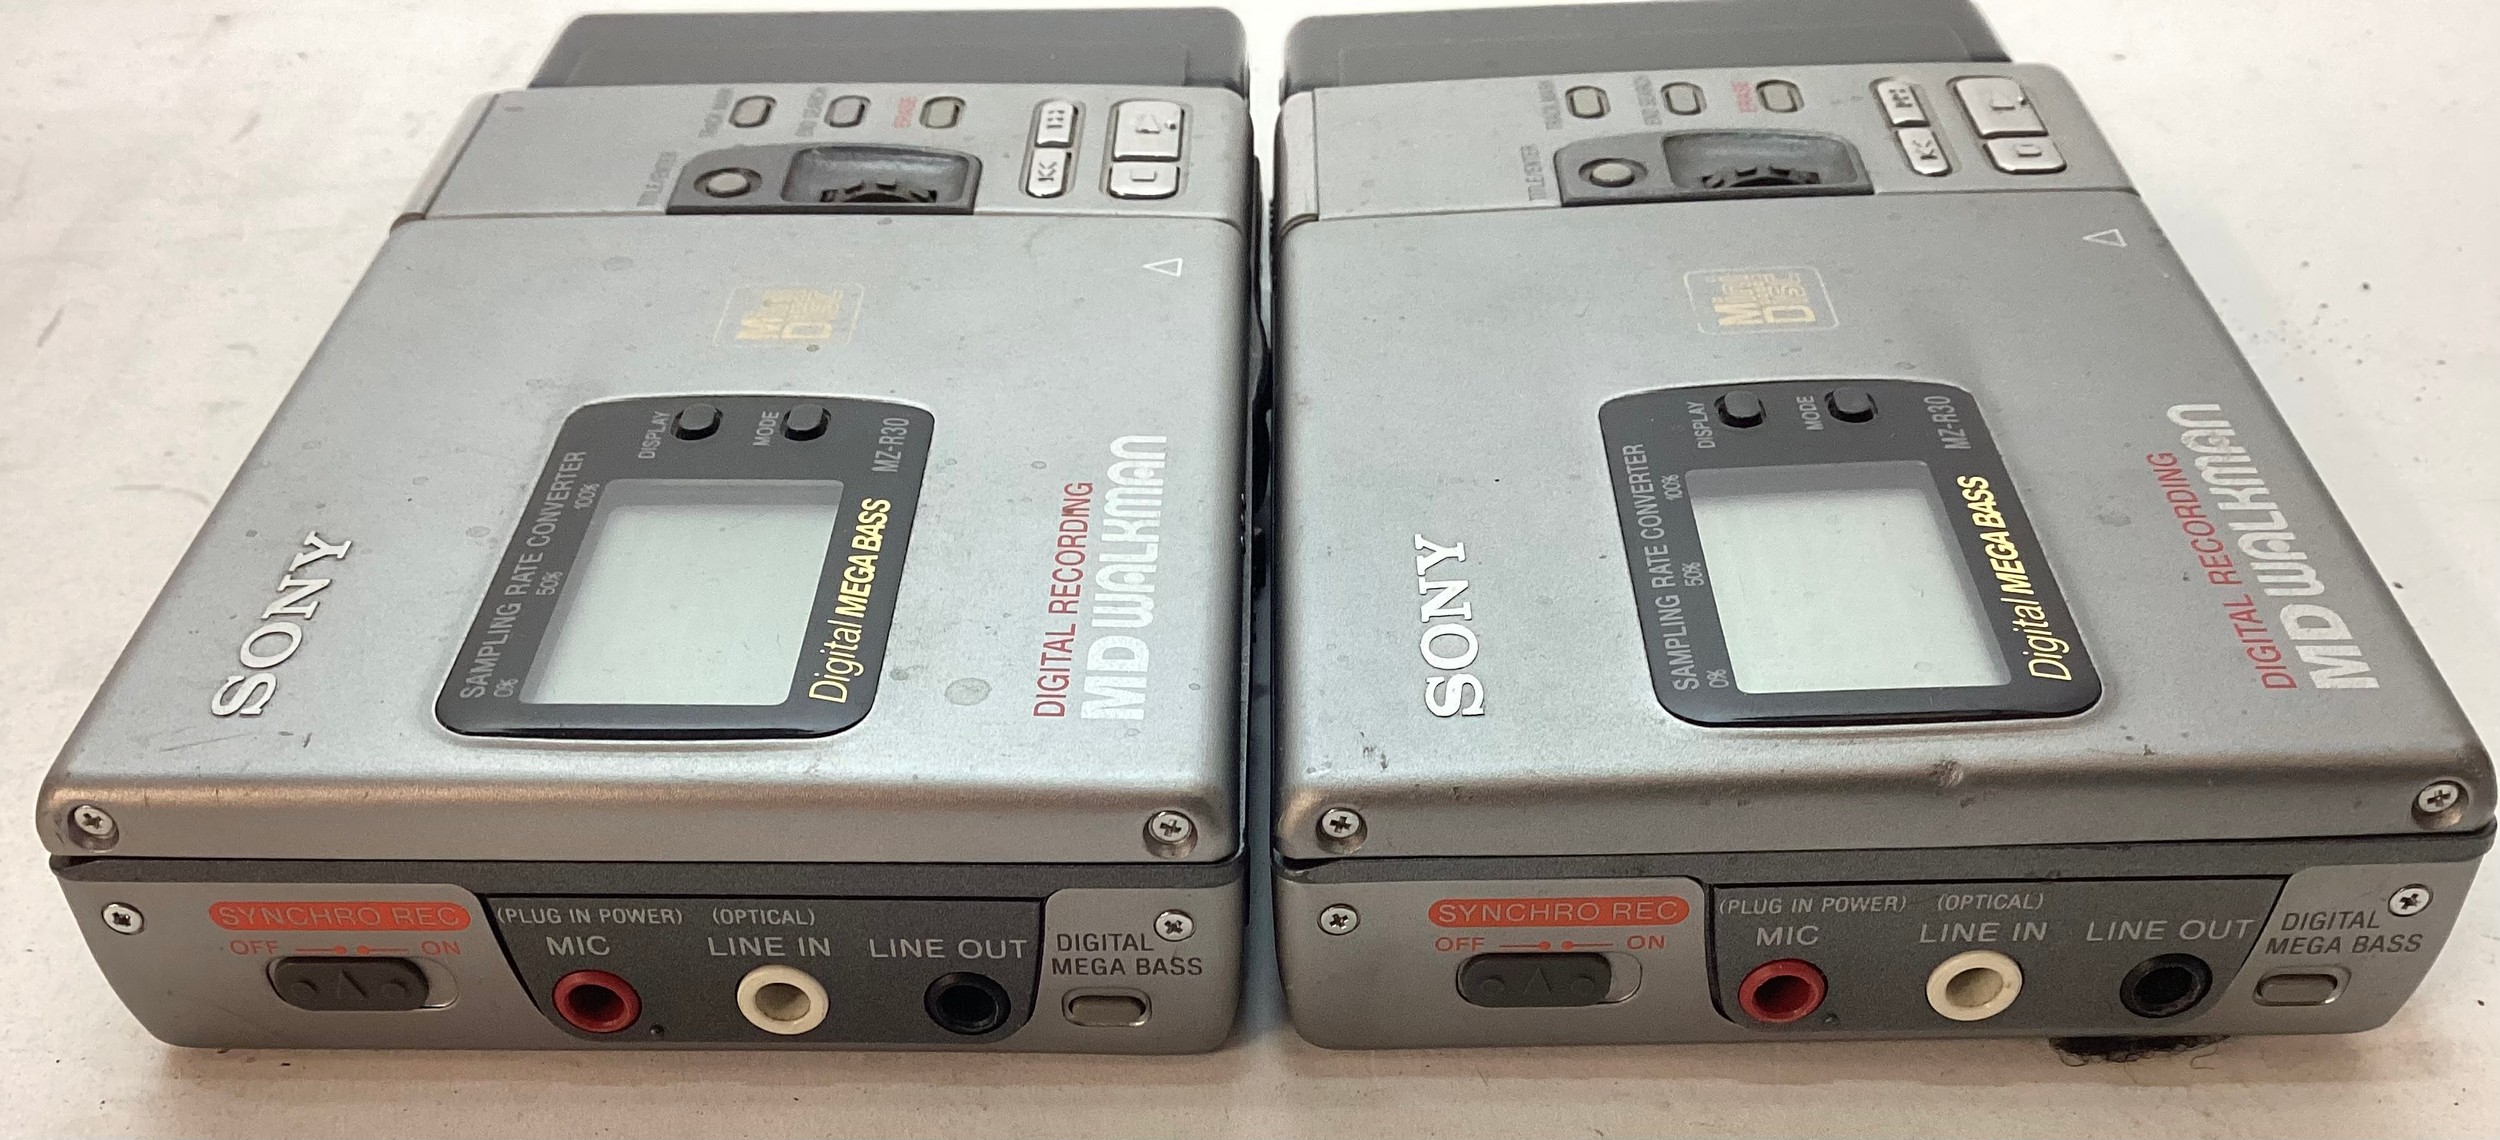 SONY MINI-DISC PLAYERS X 2. These are digital minidisc players/ recorders. They are model No. MZ- - Bild 3 aus 4